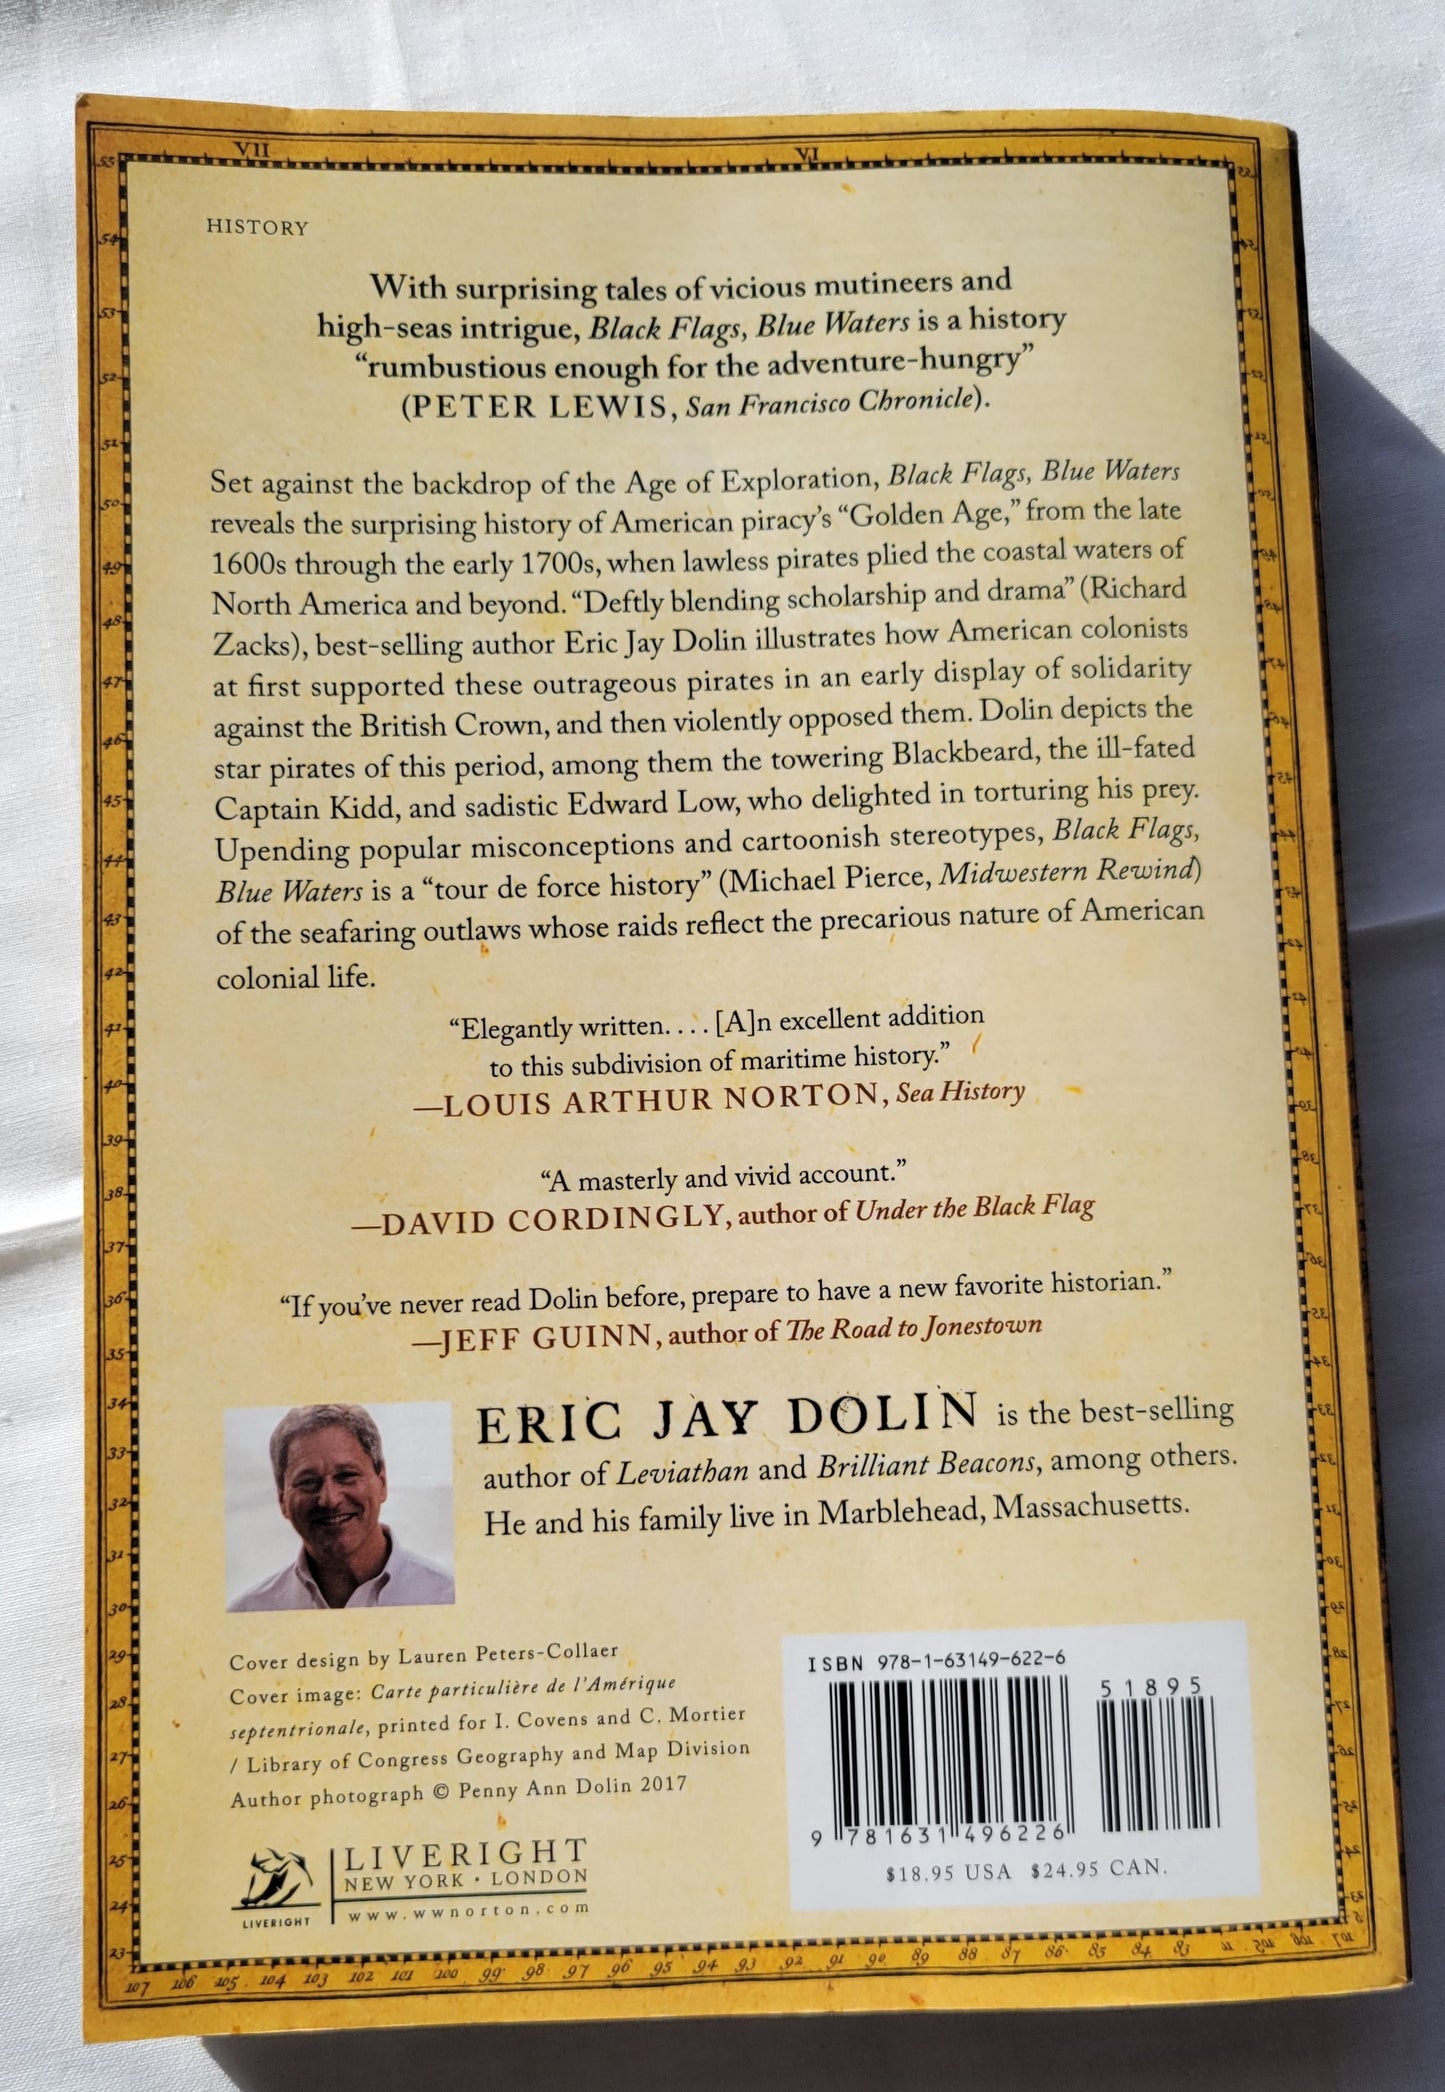 "Black Flags Blue Waters: The Epic History of America's Most Notorious Pirates" by Eric Jay Dolin, published by Liveright in 2018.  "With surprising tales of vicious mutineers, imperial riches, and high-seas intrigue, Black Flags, Blue Waters vividly reanimates the “Golden Age” of piracy in the Americas.  View of back cover.